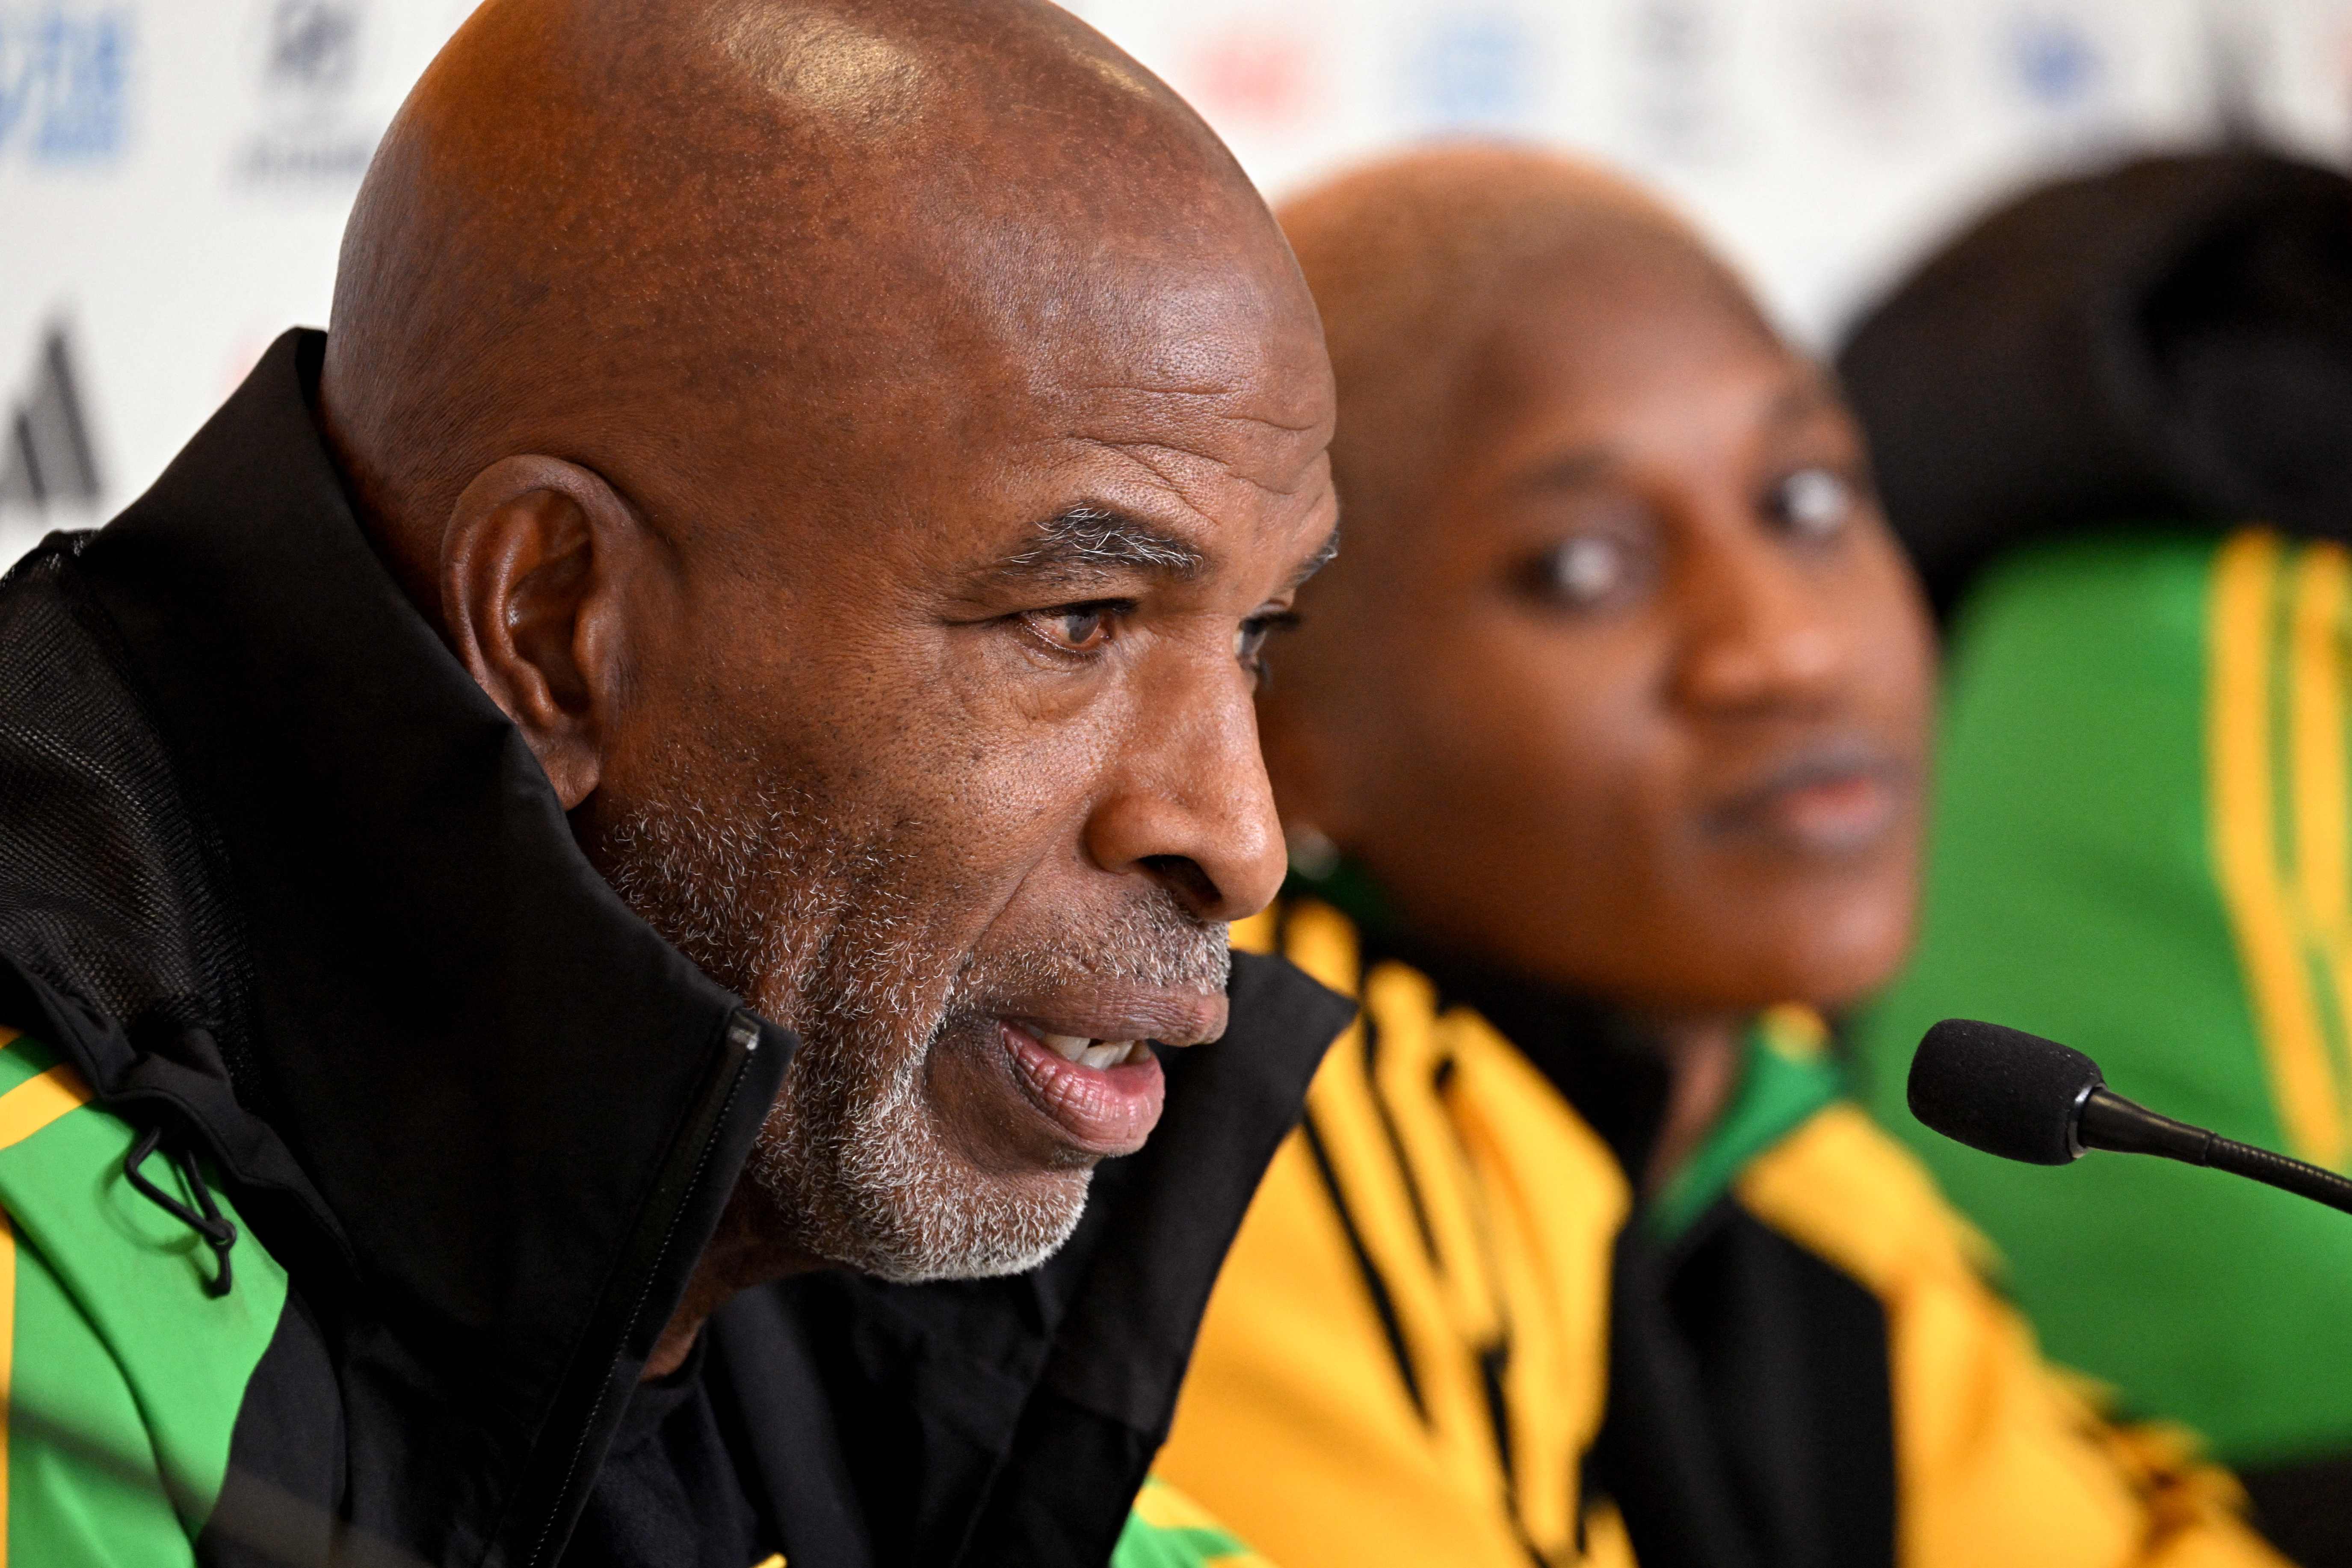 Jamaica coach tells story of Jamaicans and Colombians partying together at a nightclub